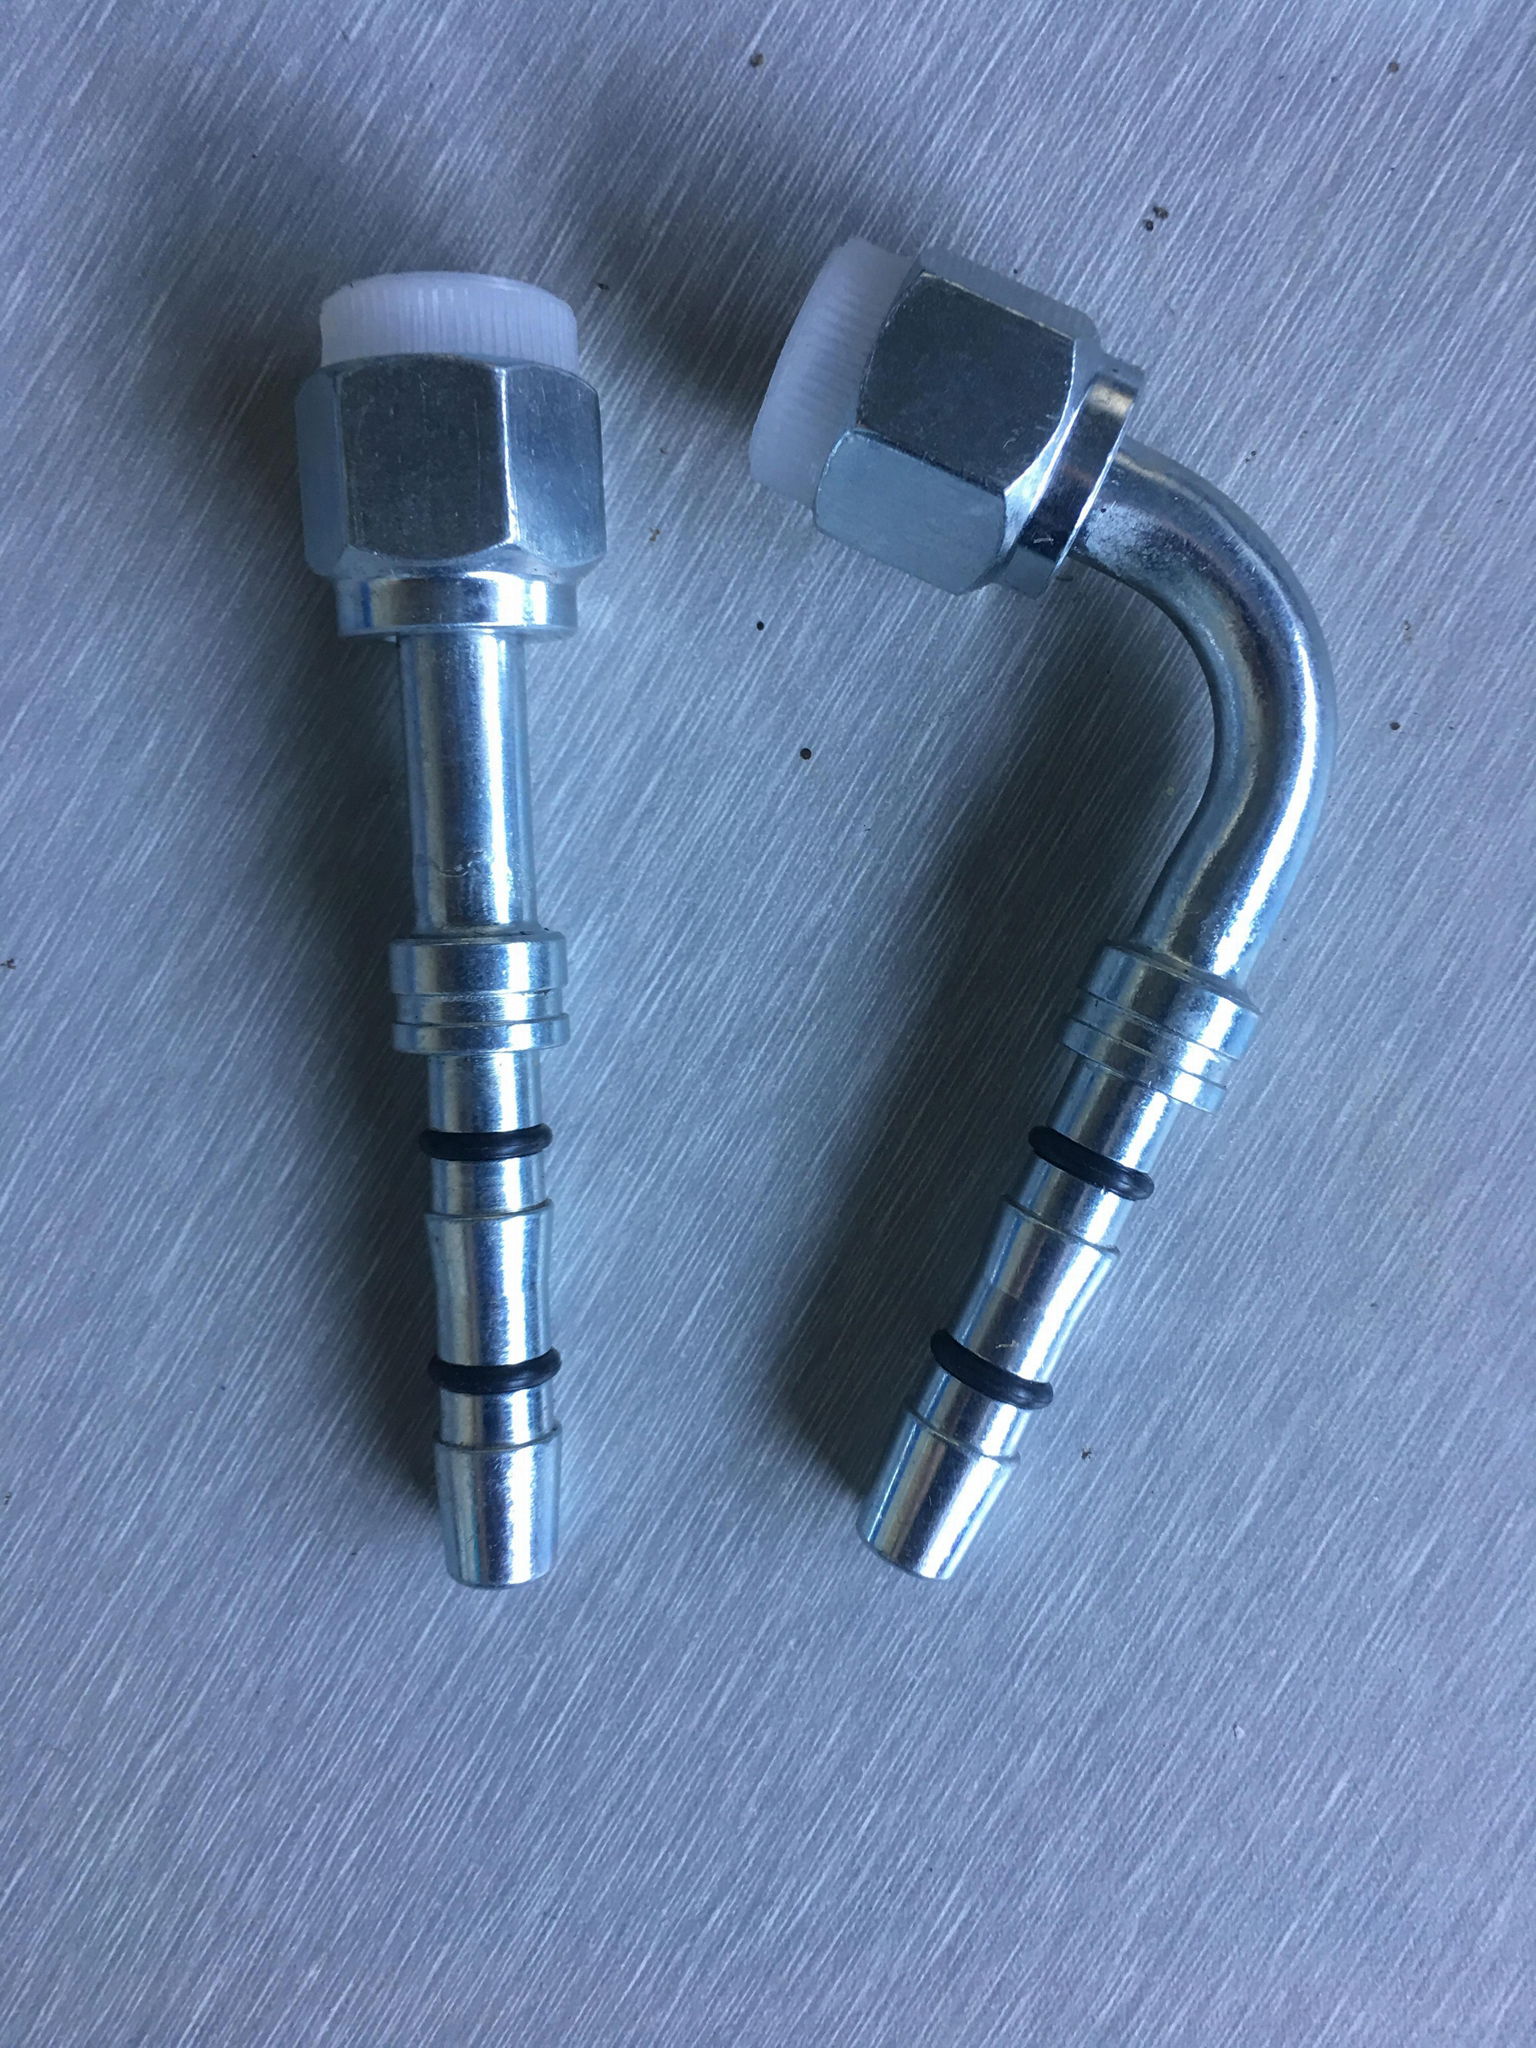 OEM Carrier Refrigeration Hose fittings R404a Refrigerator Hose fittings 2